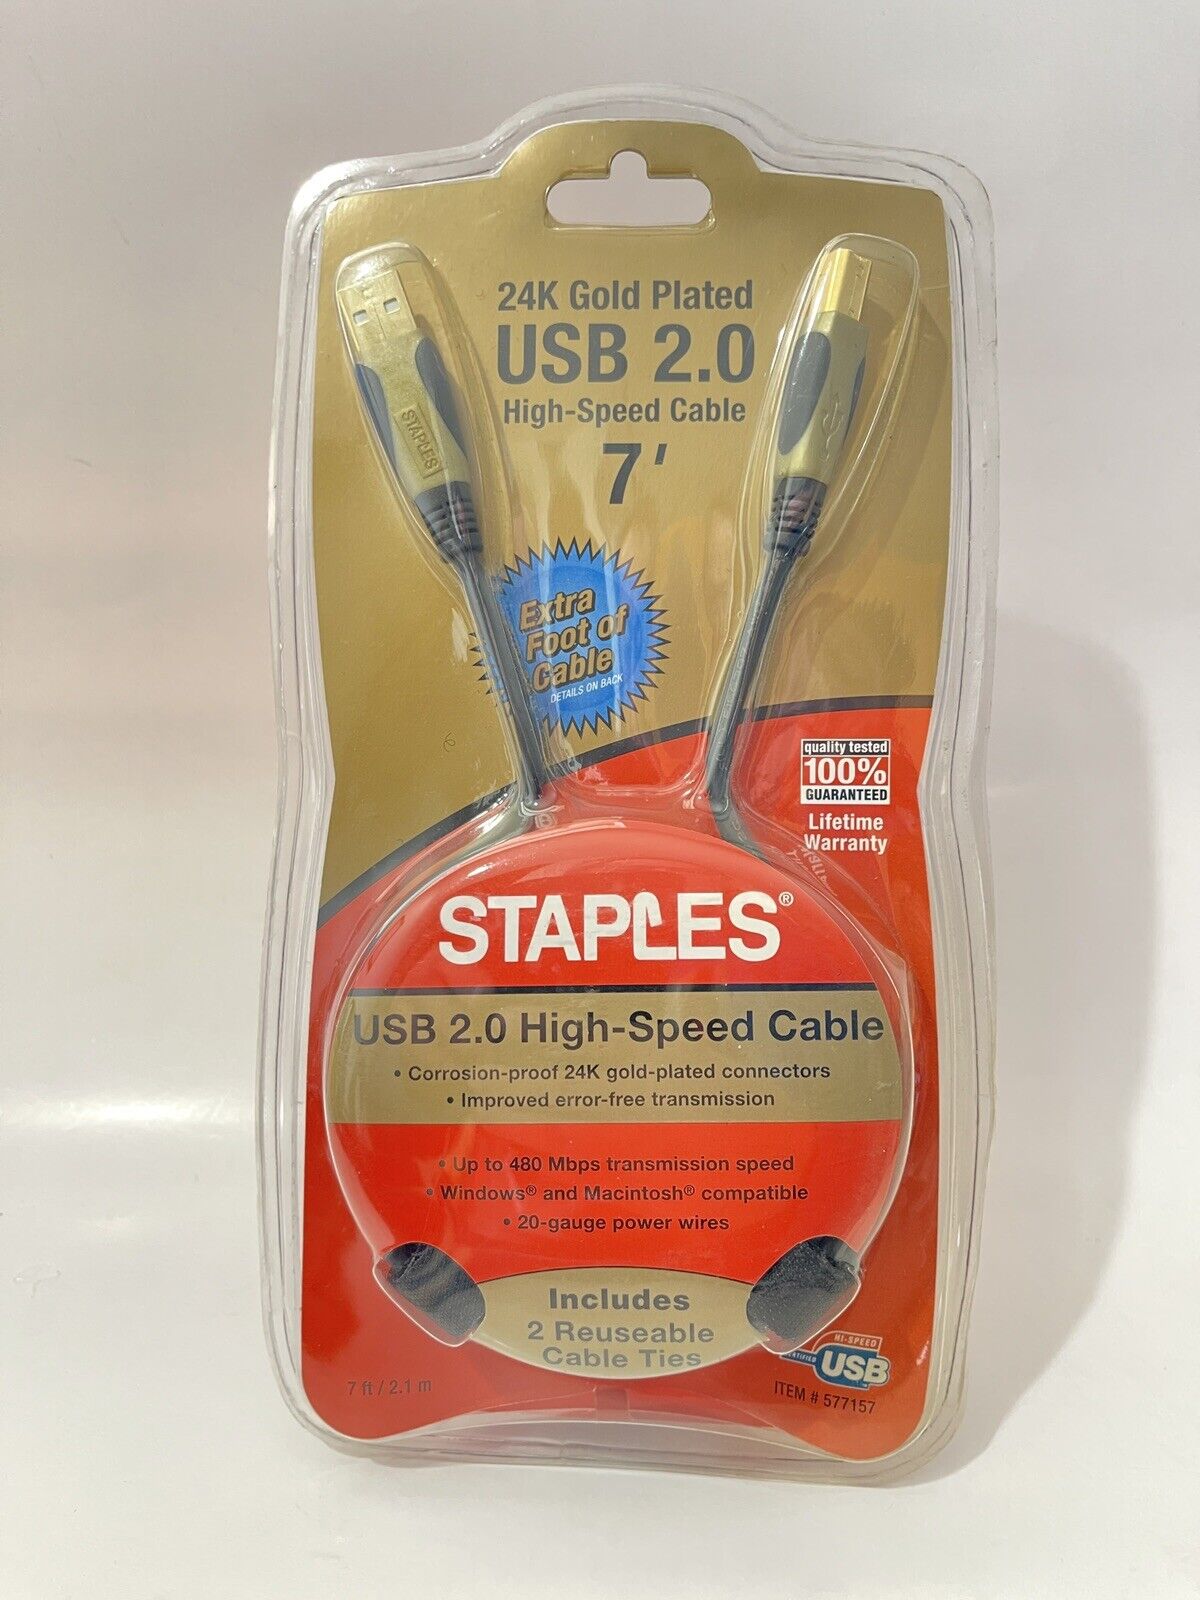 Staples 24K Gold plated 7’ USB 2.0 High Speed Cable